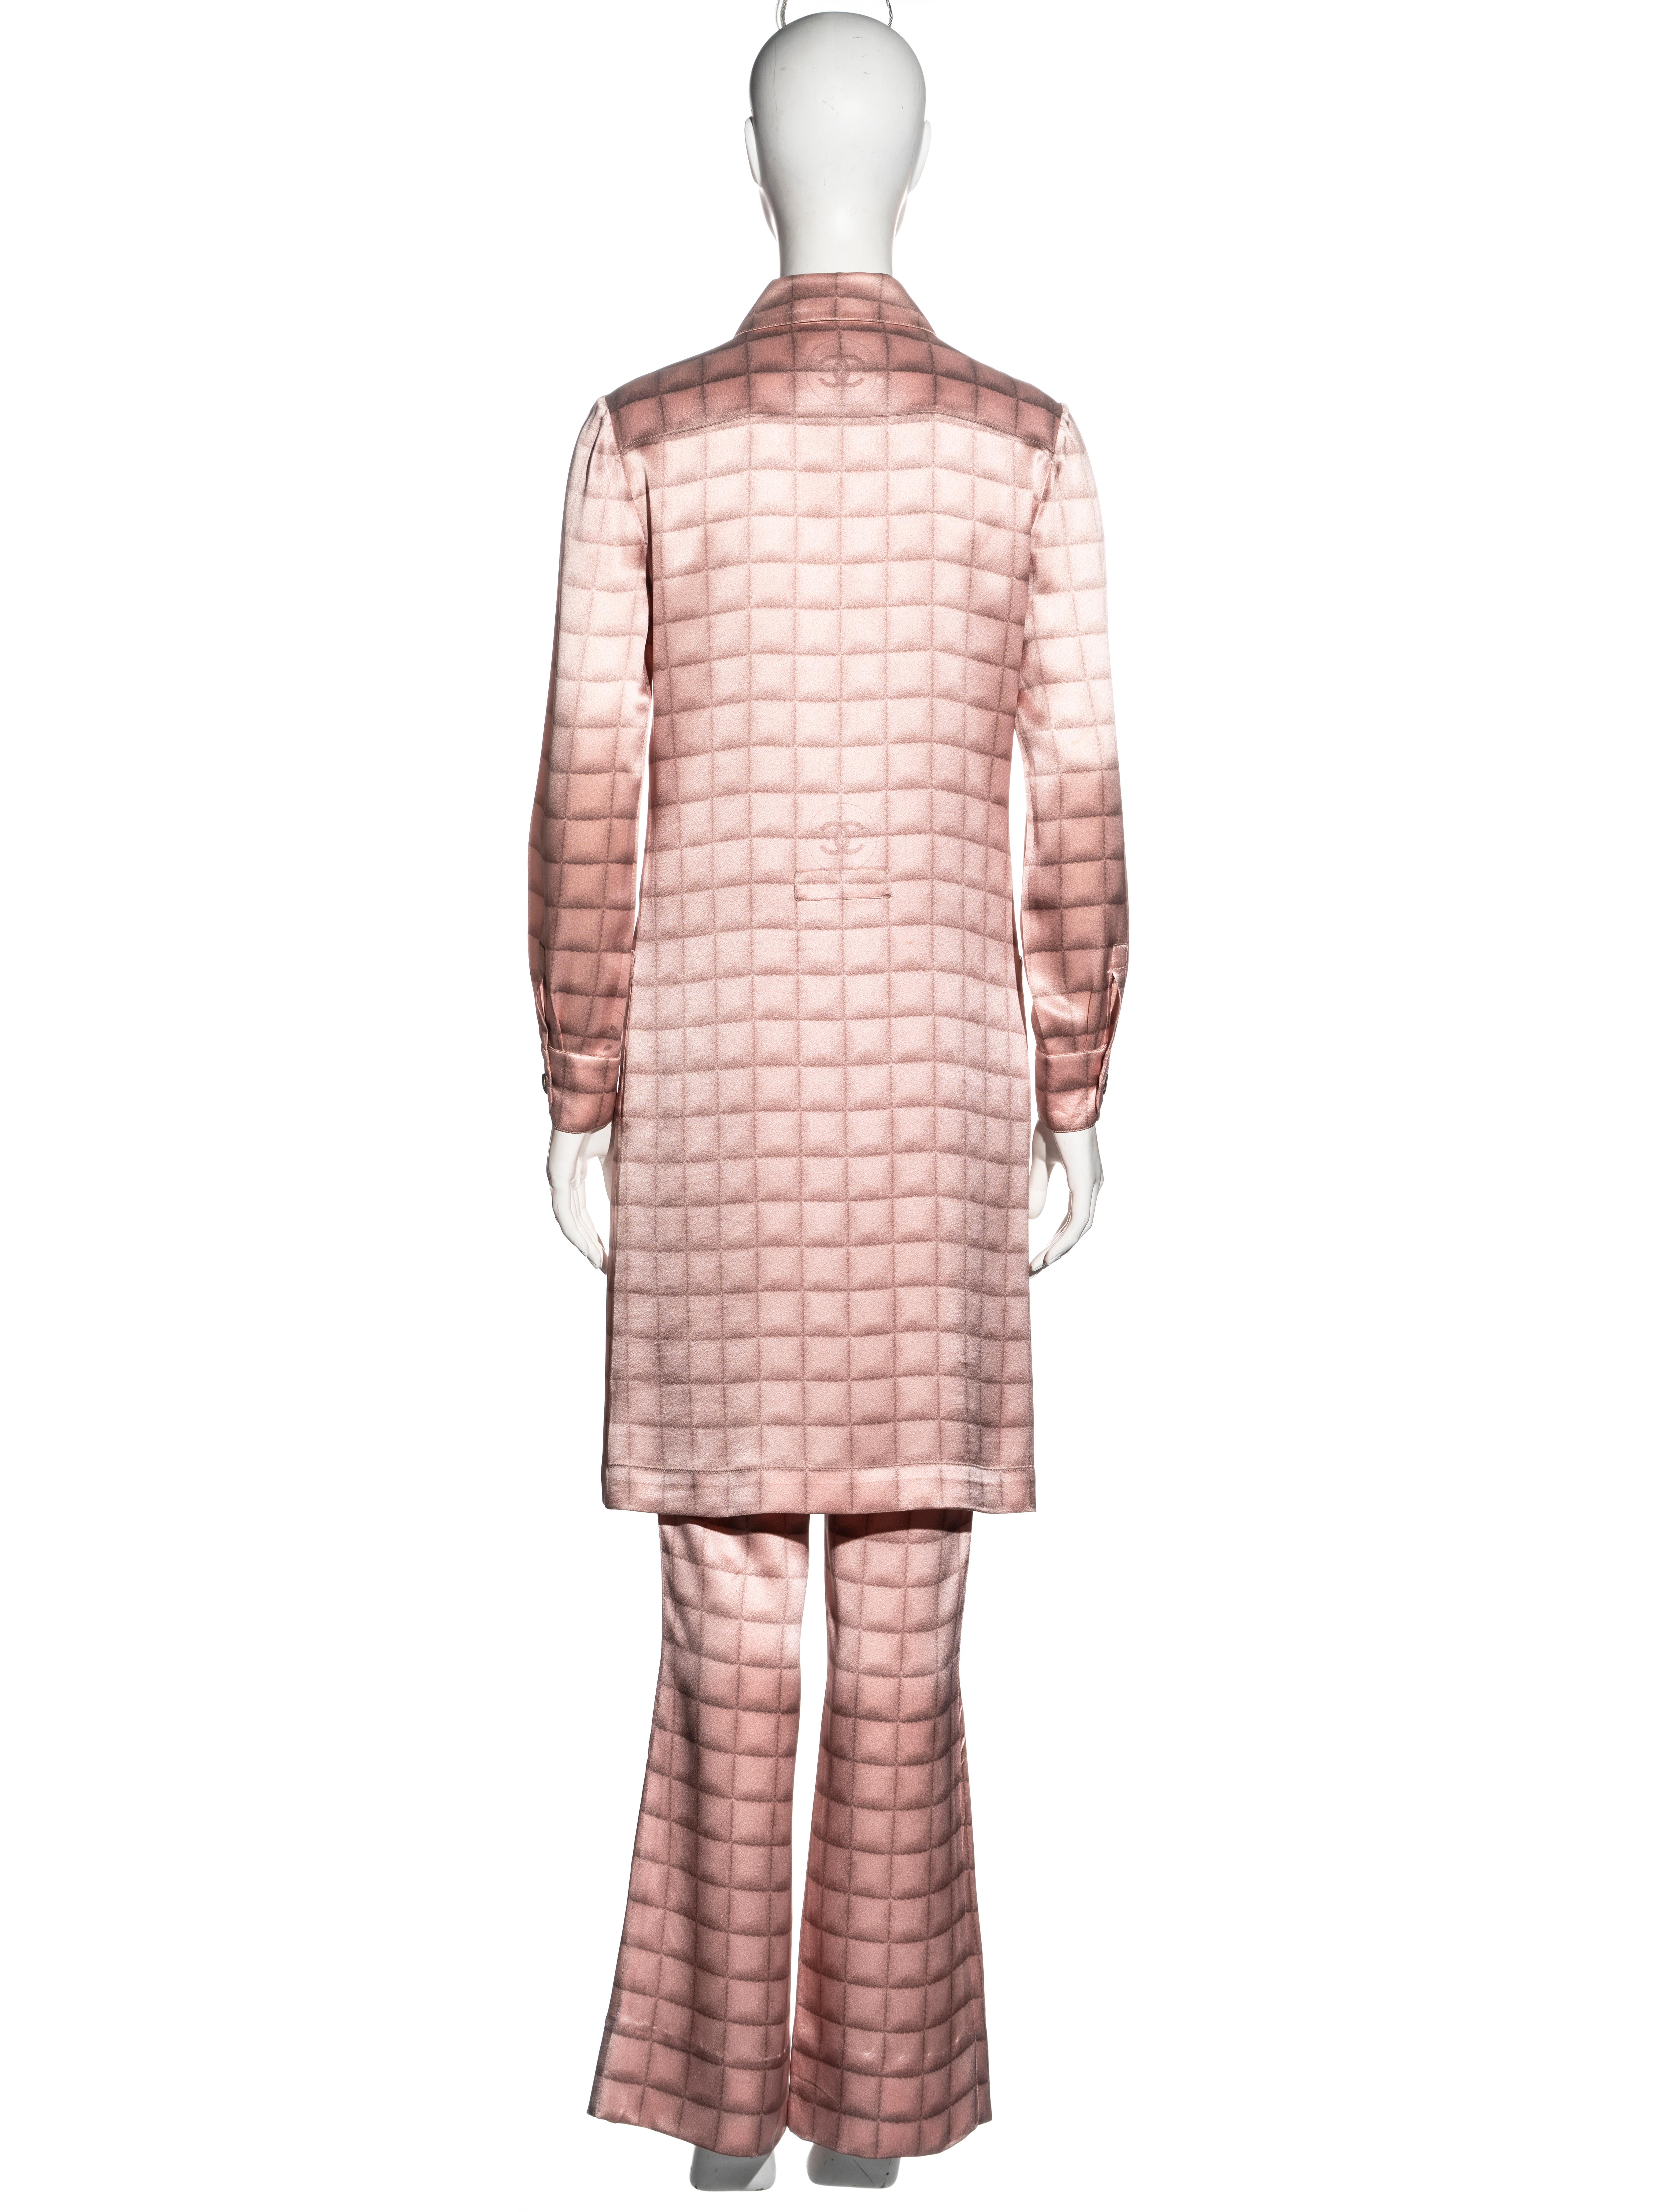 Chanel by Karl Lagerfeld pink silk shirt dress and pants suit, fw 2000 4